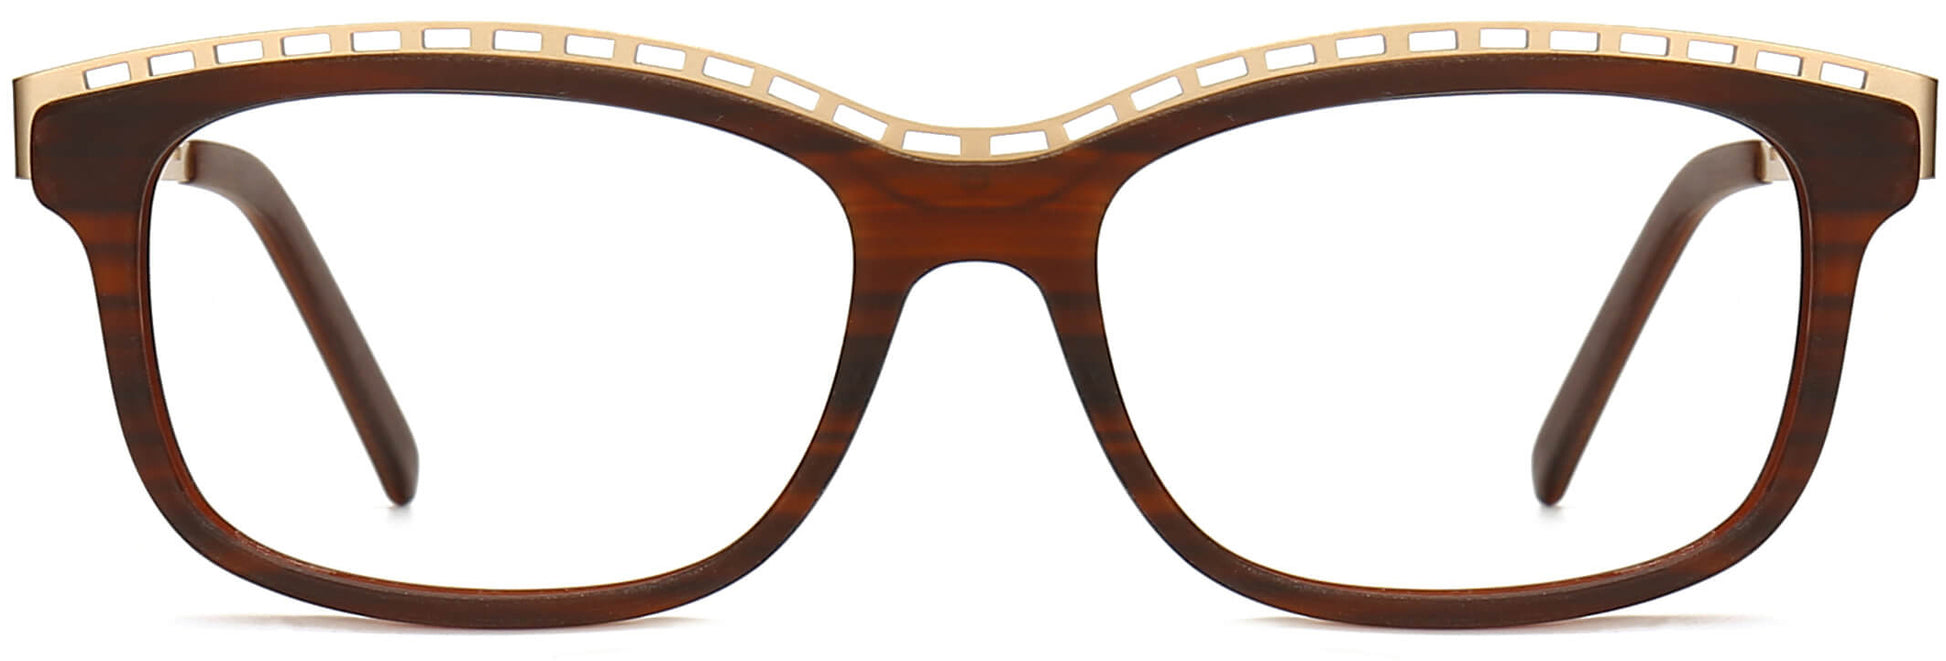 Aubrie Cateye Brown Eyeglasses from ANRRI, front view